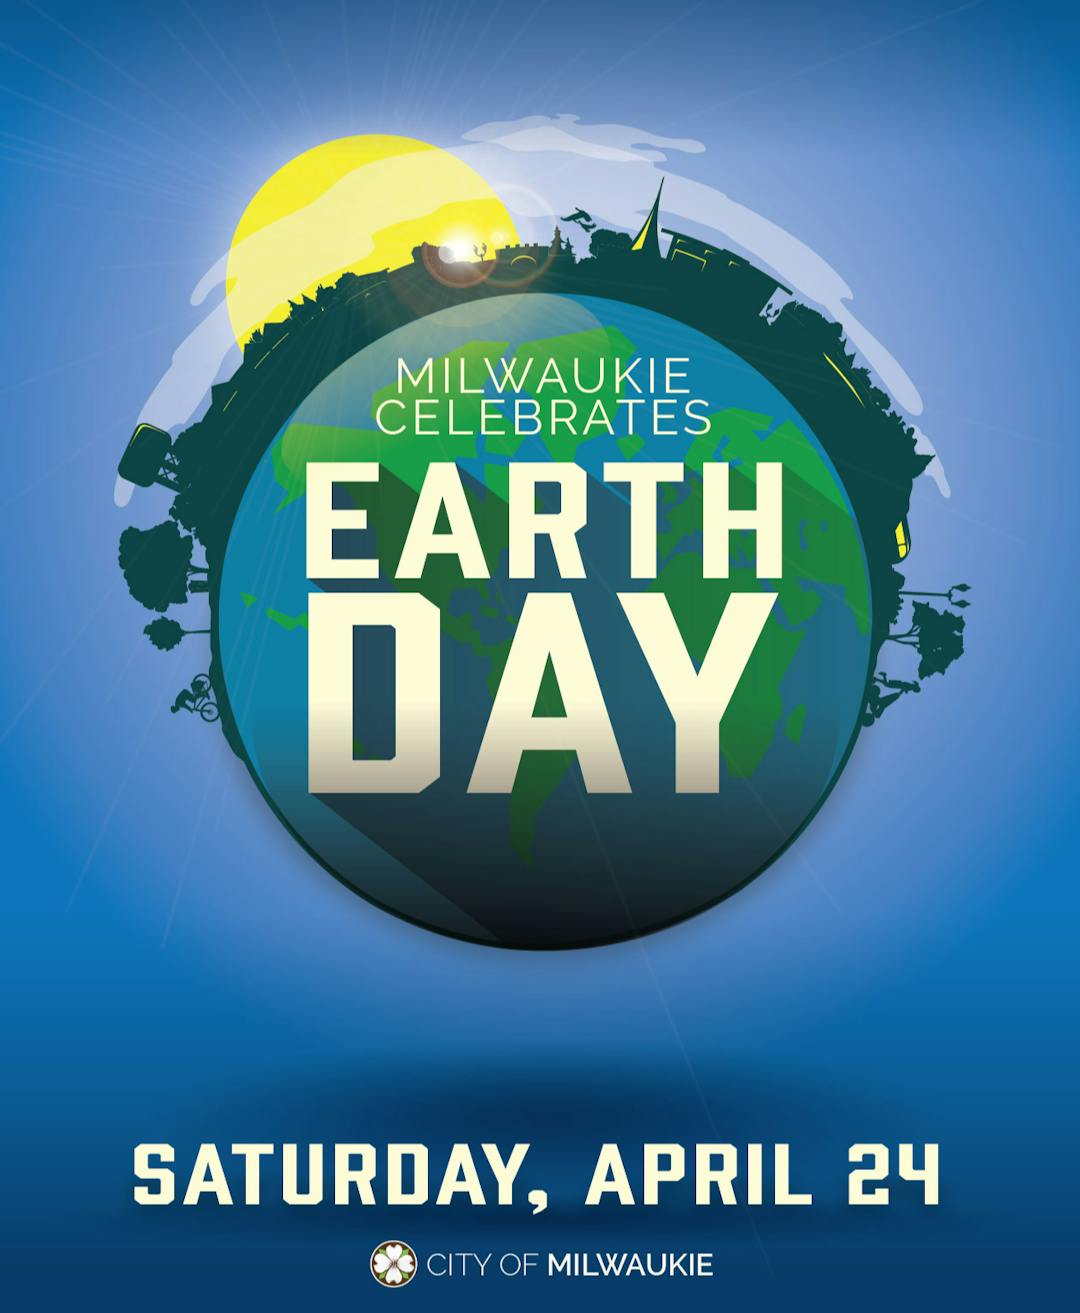 An image of a globe outlined with the Milwaukie skyline, overlaid with text "Milwaukie celebrates Earth Day, Saturday, April 24".